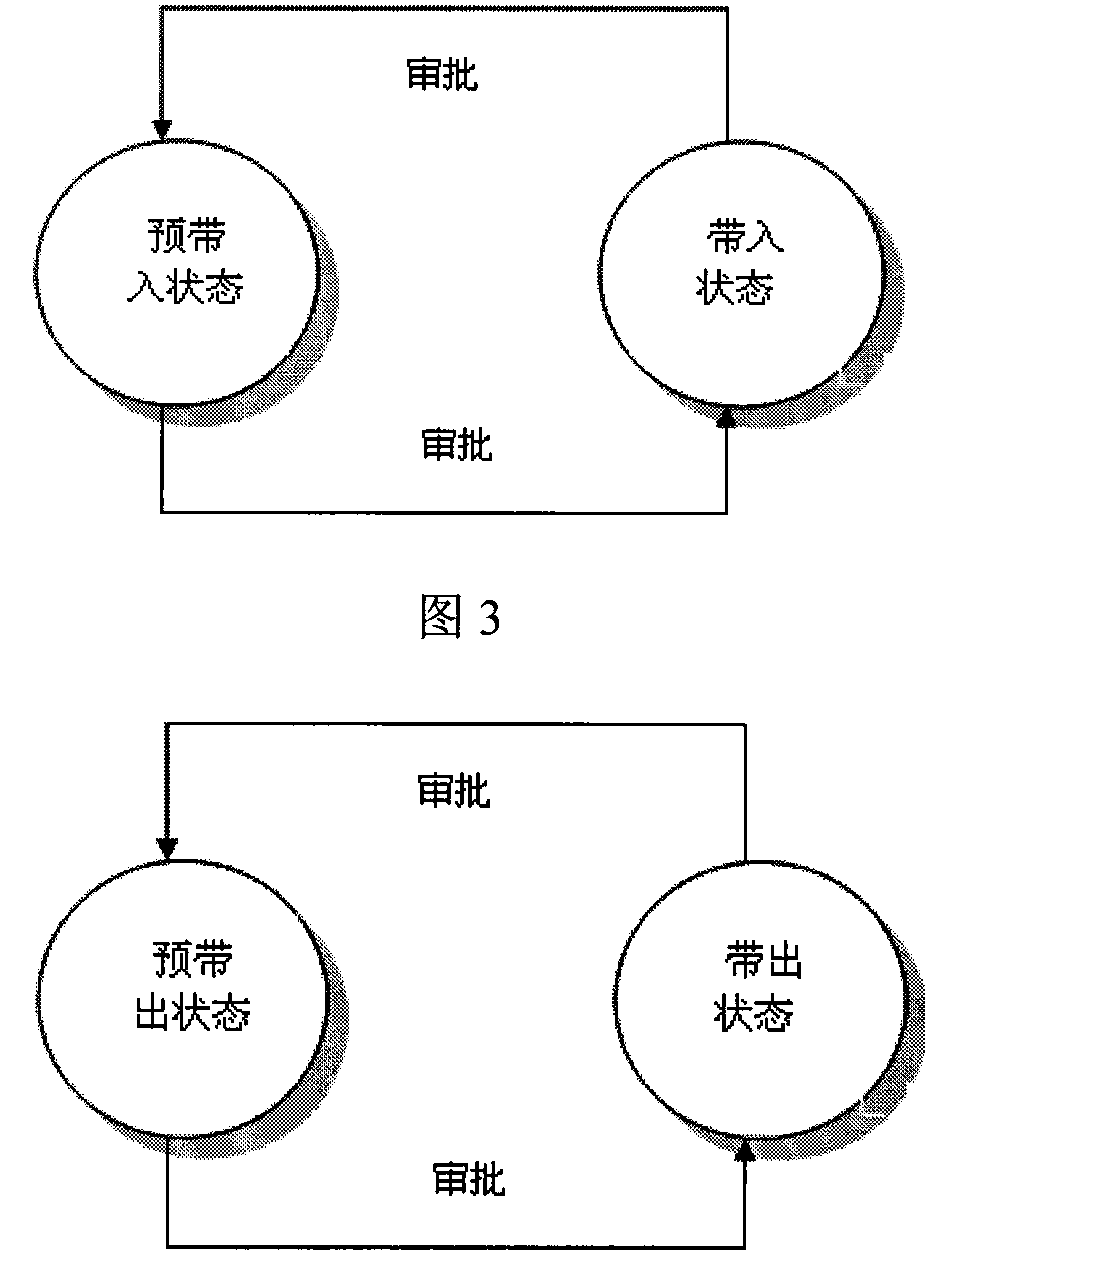 Method of safety ferriage of USB flash disk data